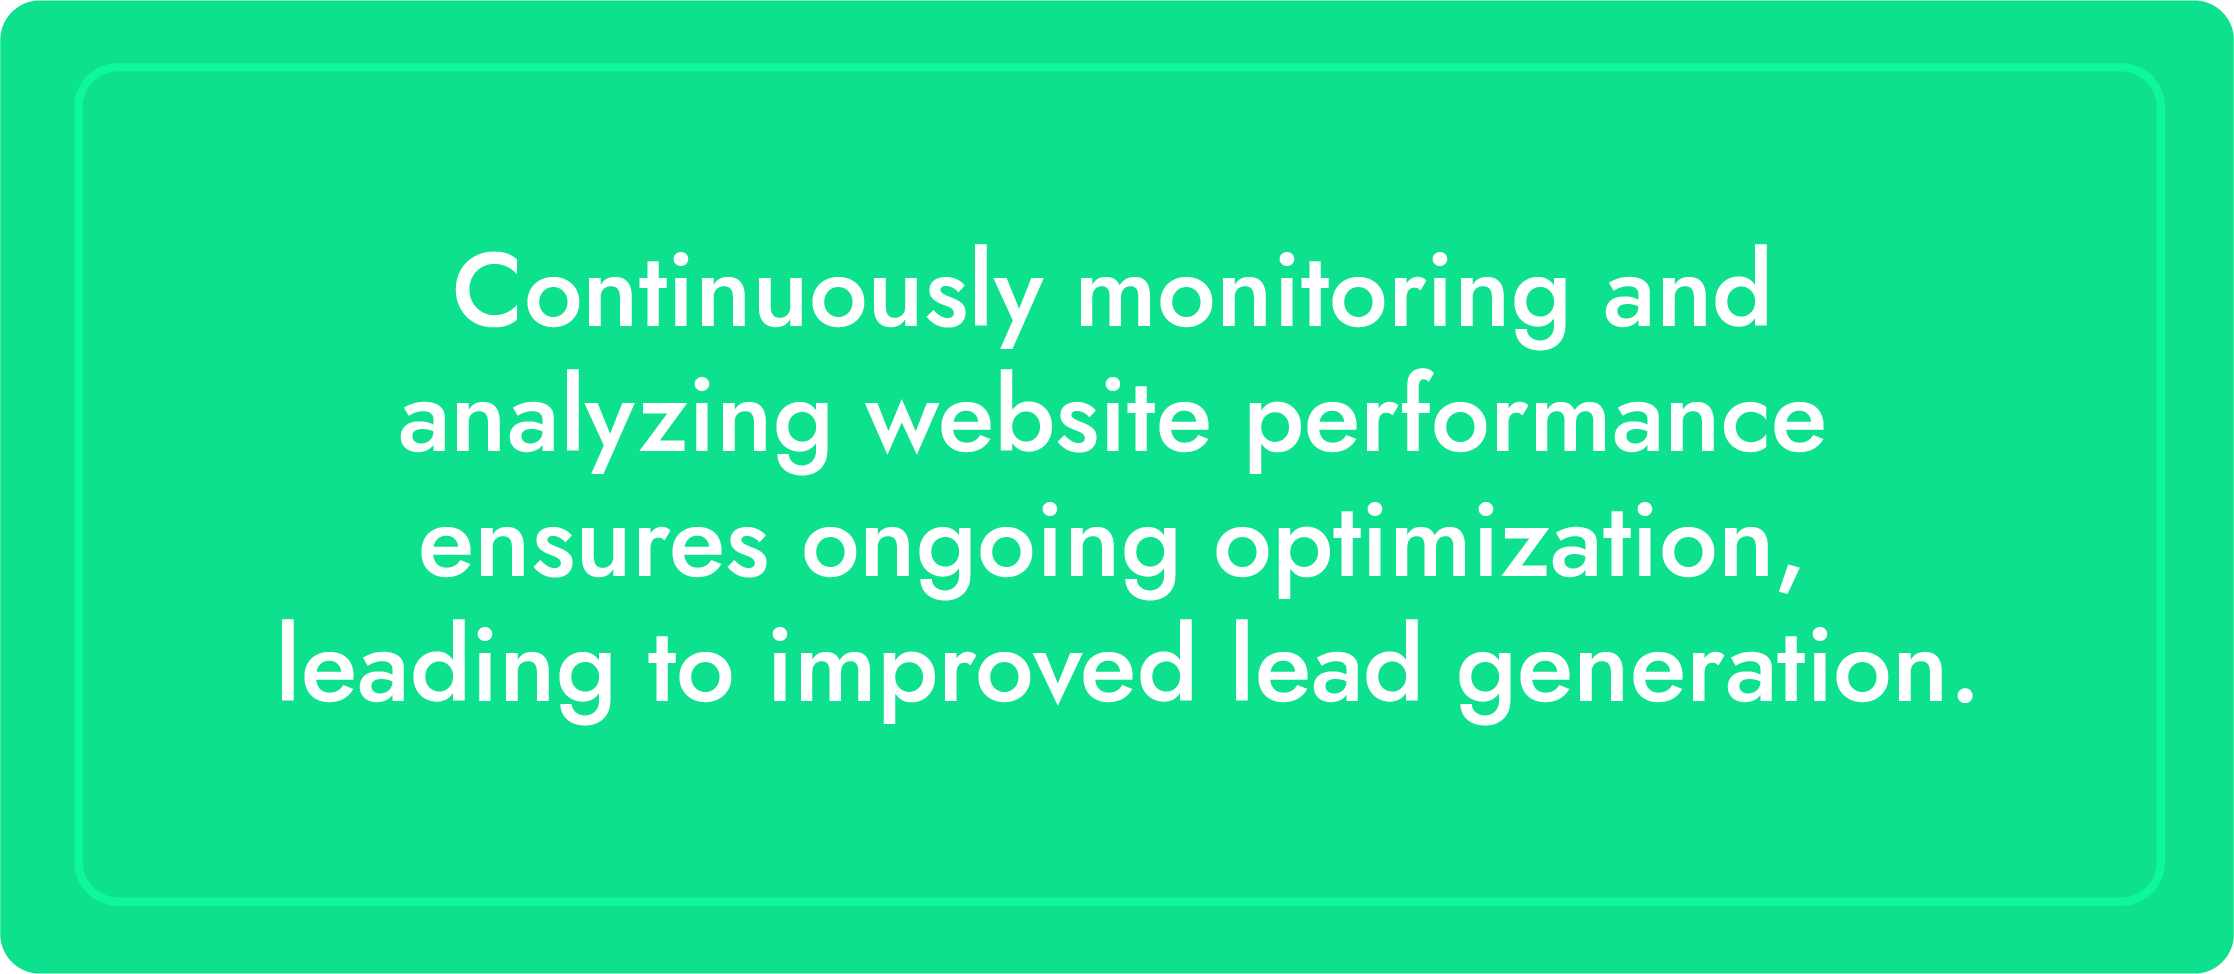 Continuously monitoring and analyzing website performance